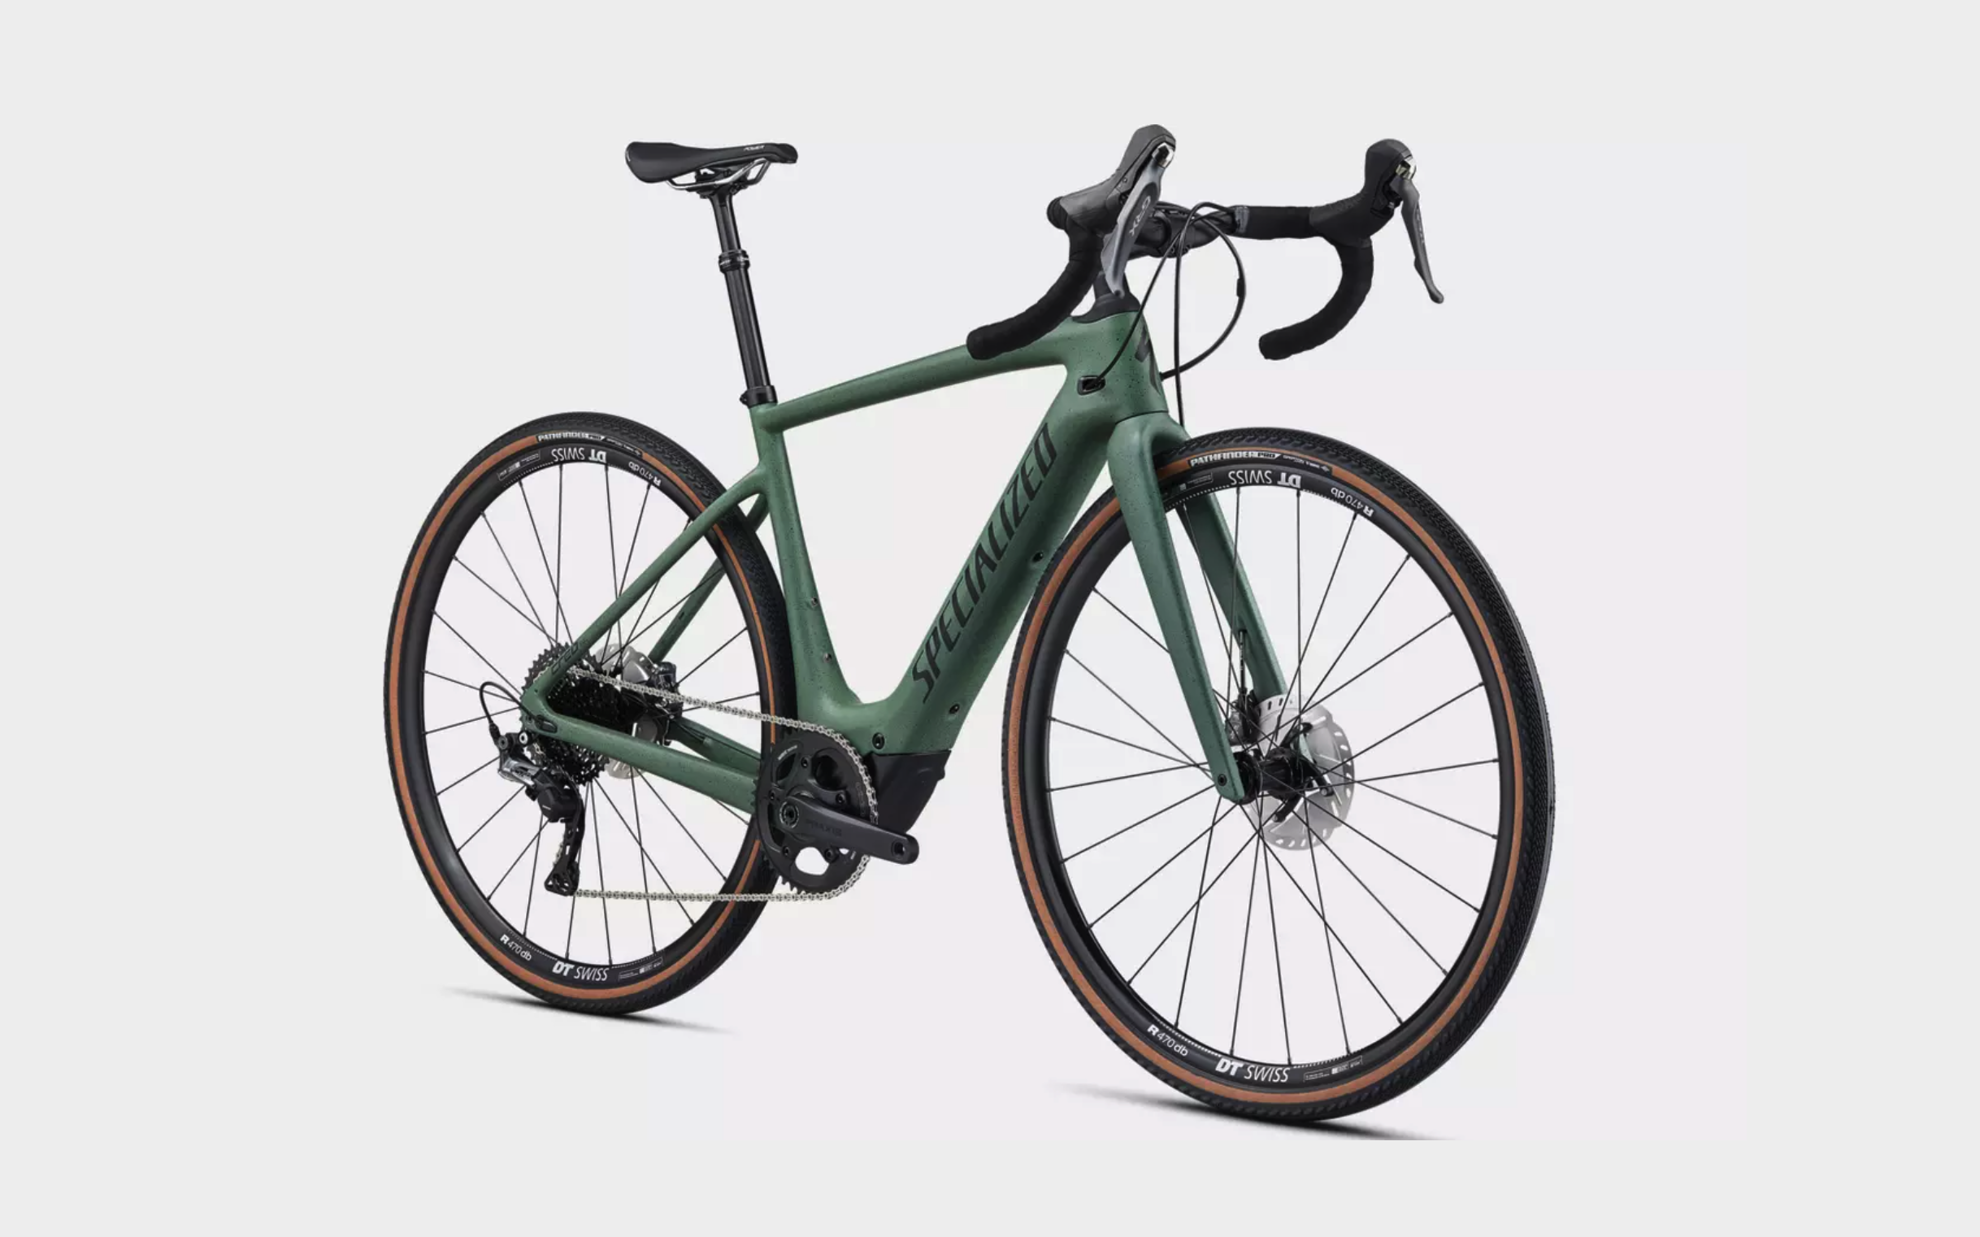 Picture of SPECIALIZED TURBO CREO SL EVO COMP CARBON MY22 Satin Sage Green/Black